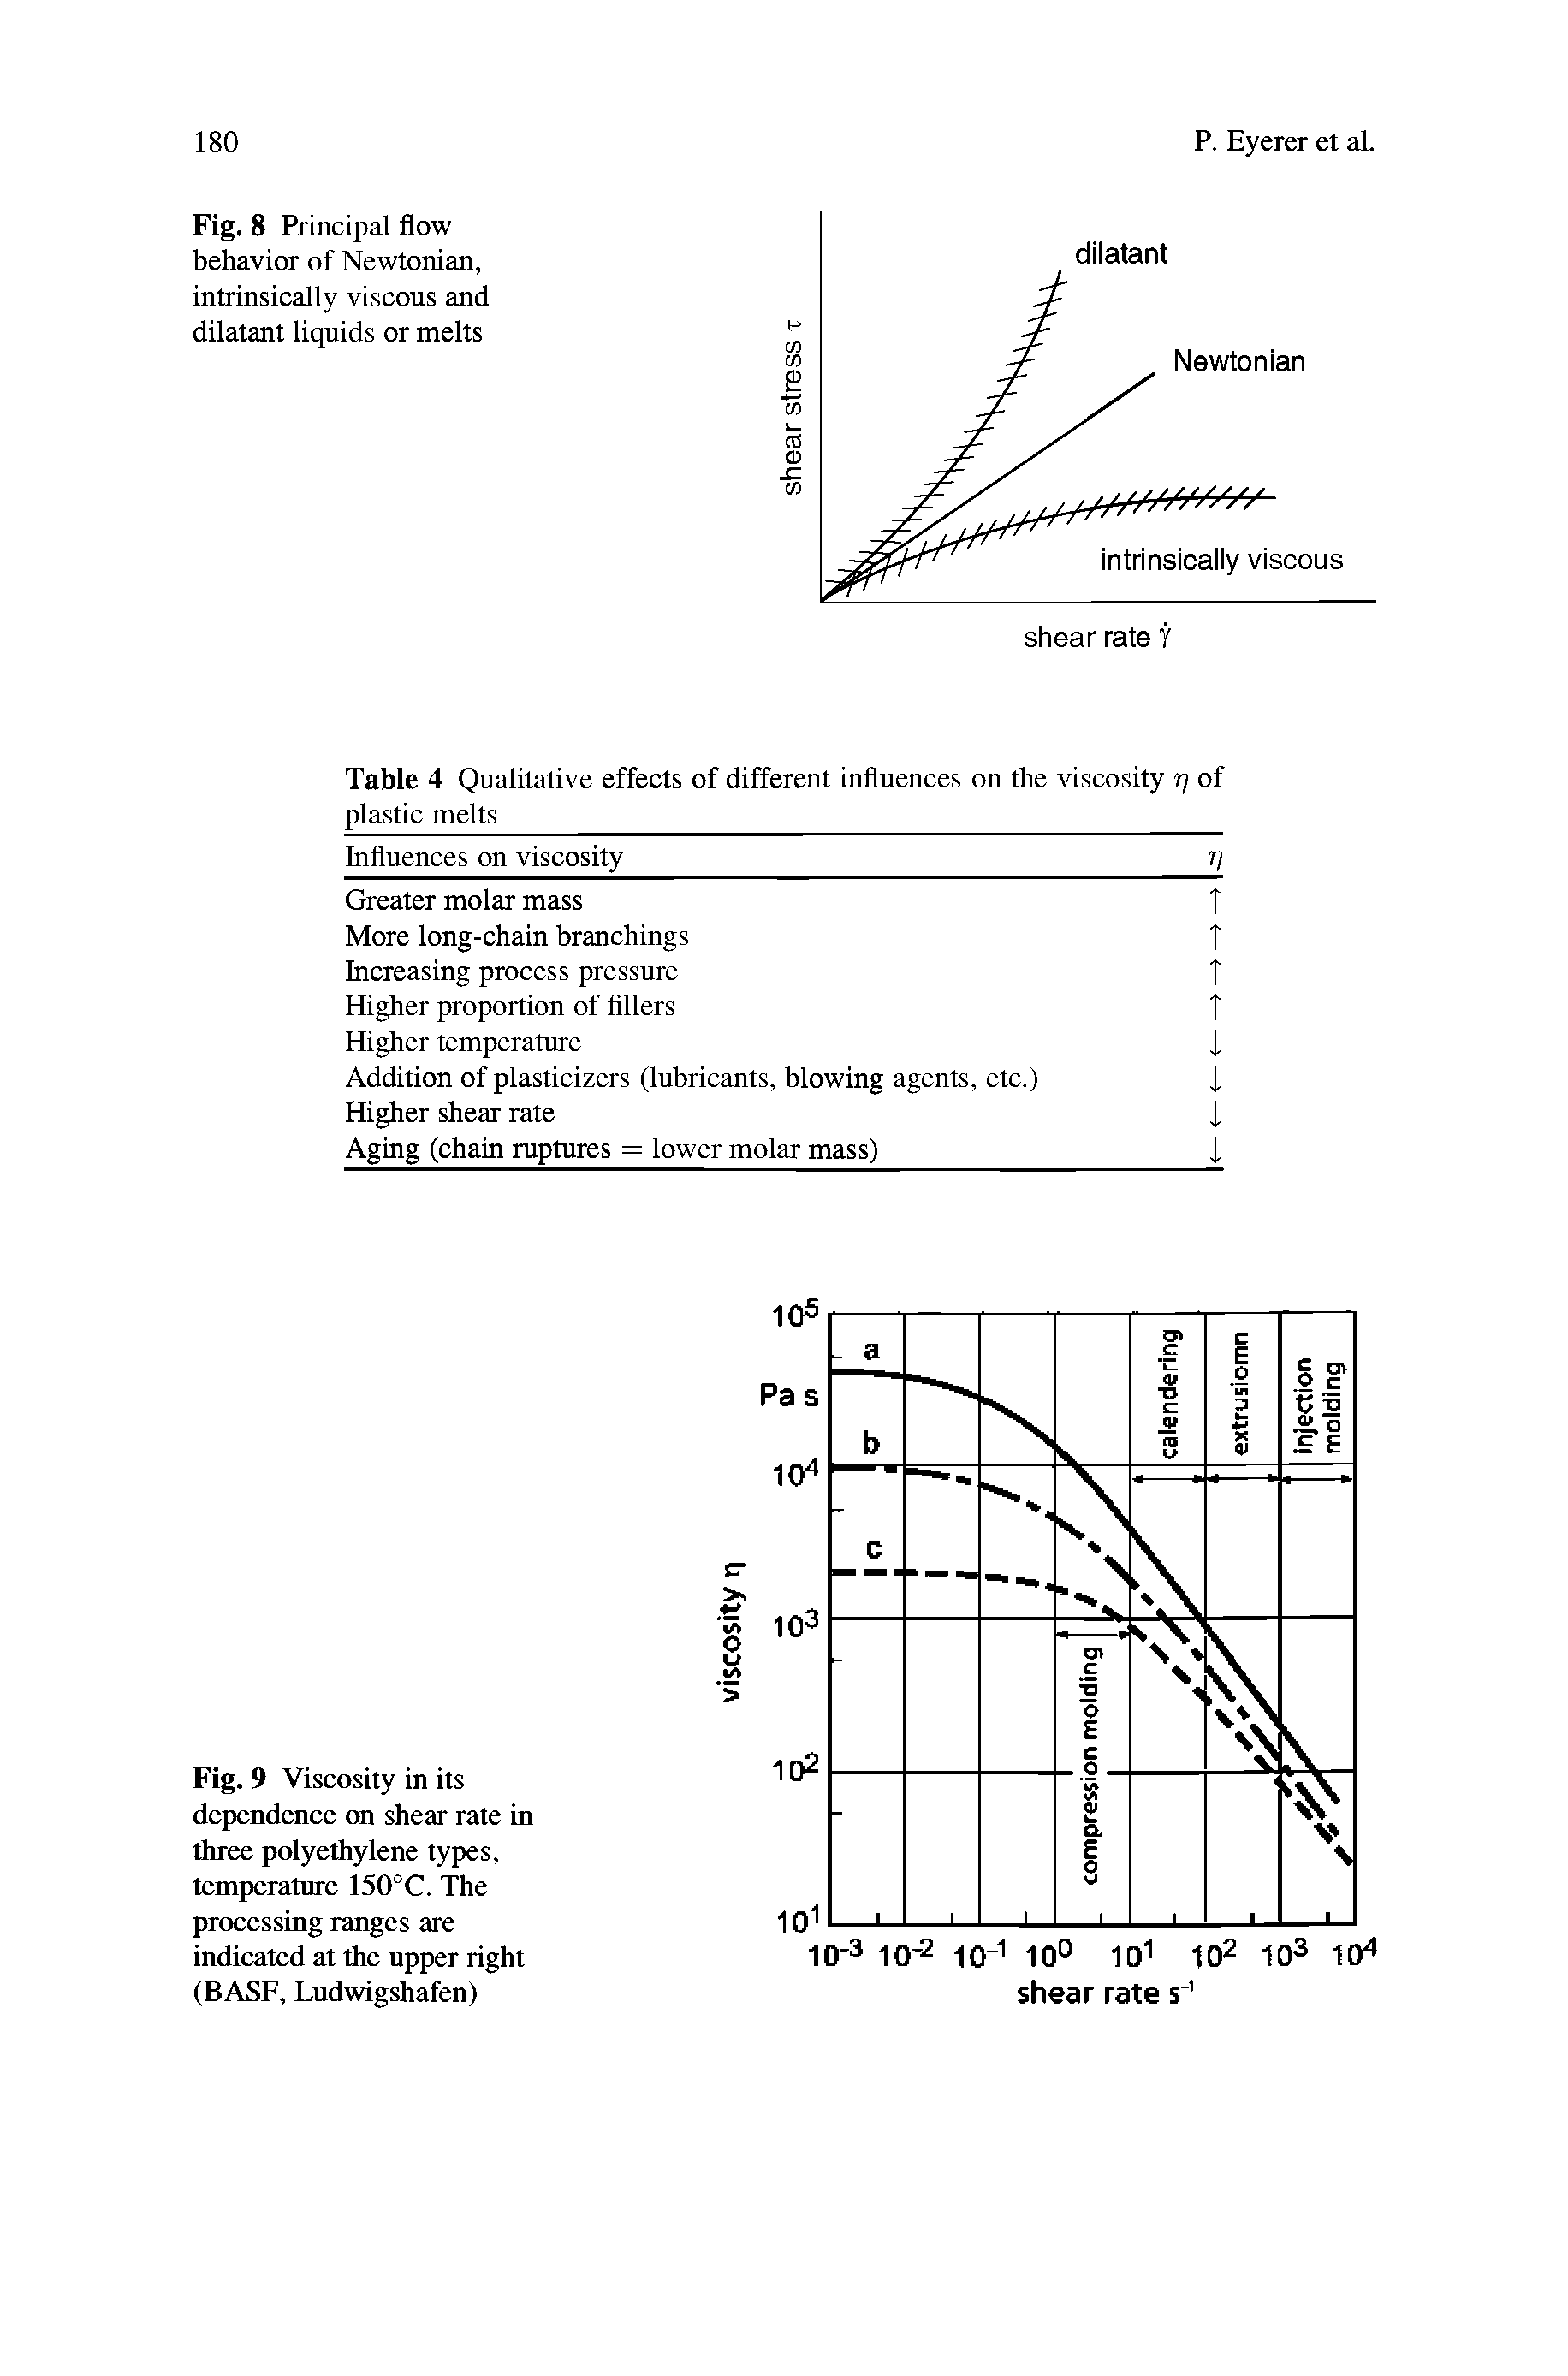 Fig. 9 Viscosity in its dependence tm shear rate in three polyethylene types, temperature 150°C. The processing ranges are indicated at the upper right (BASF, Ludwigshafen)...